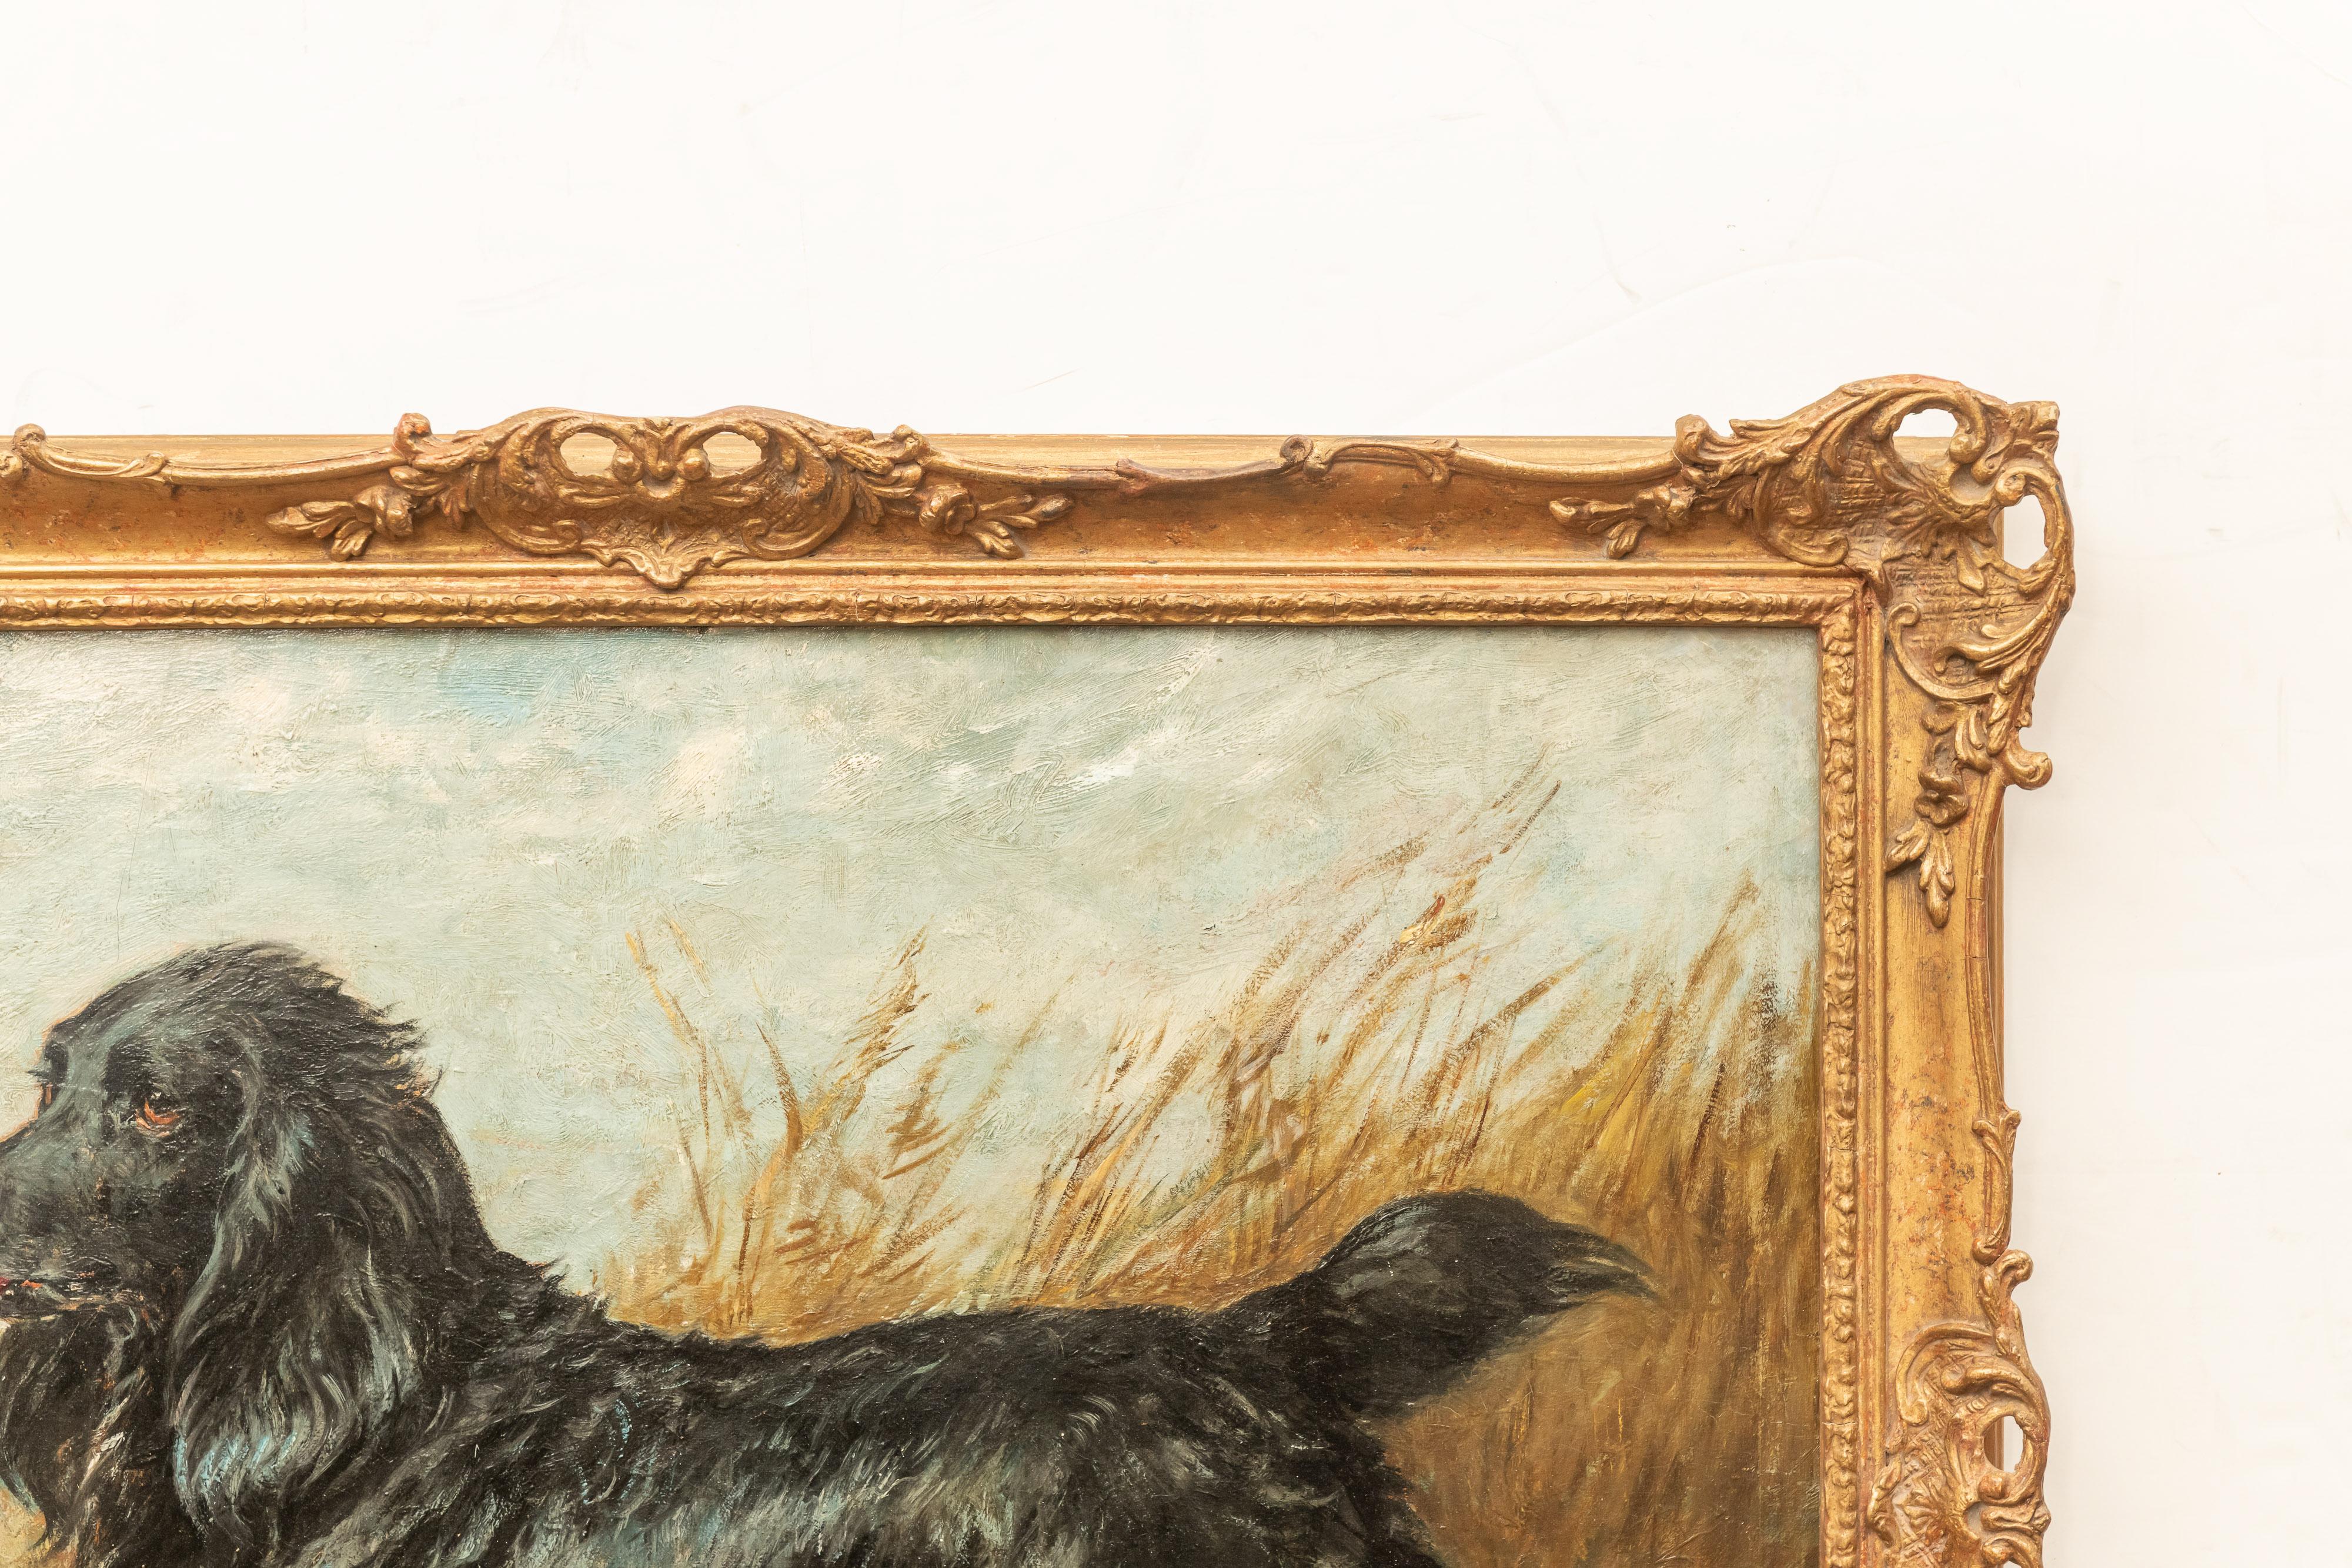 Oil on canvas. Portrait of a black spaniel with a duck by John Emms, (Blofield, Norfolk, 1841-1912) signed and dated lower right: JNP Emms / 95'
26